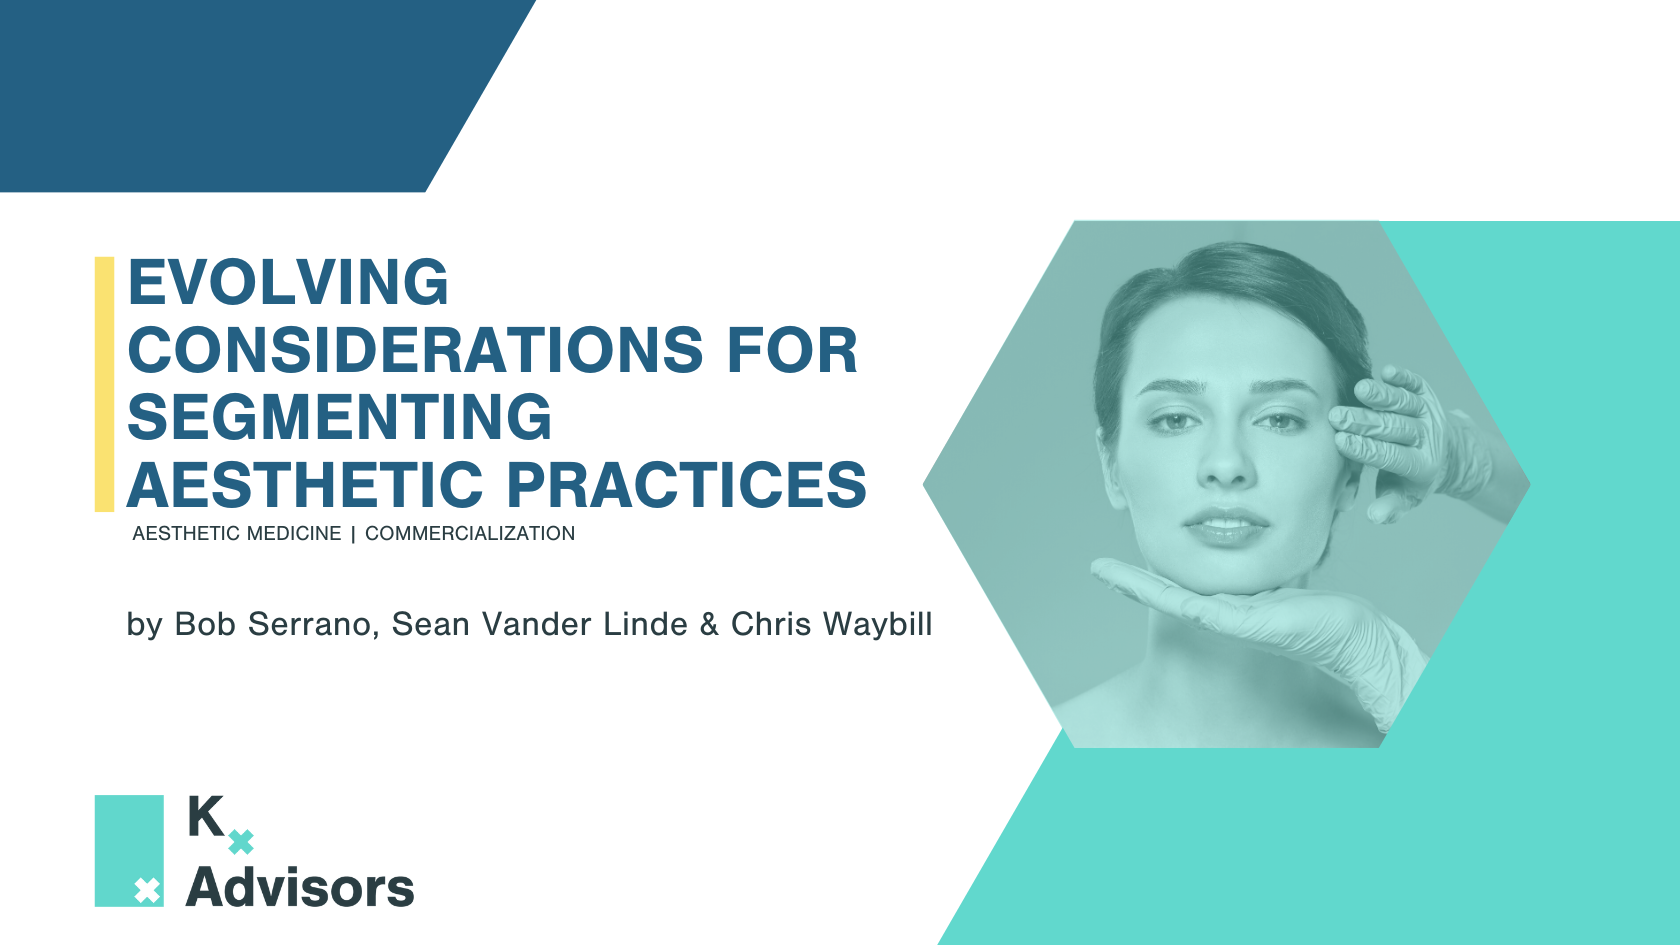 Evolving Considerations for Segmenting Aesthetic Practices